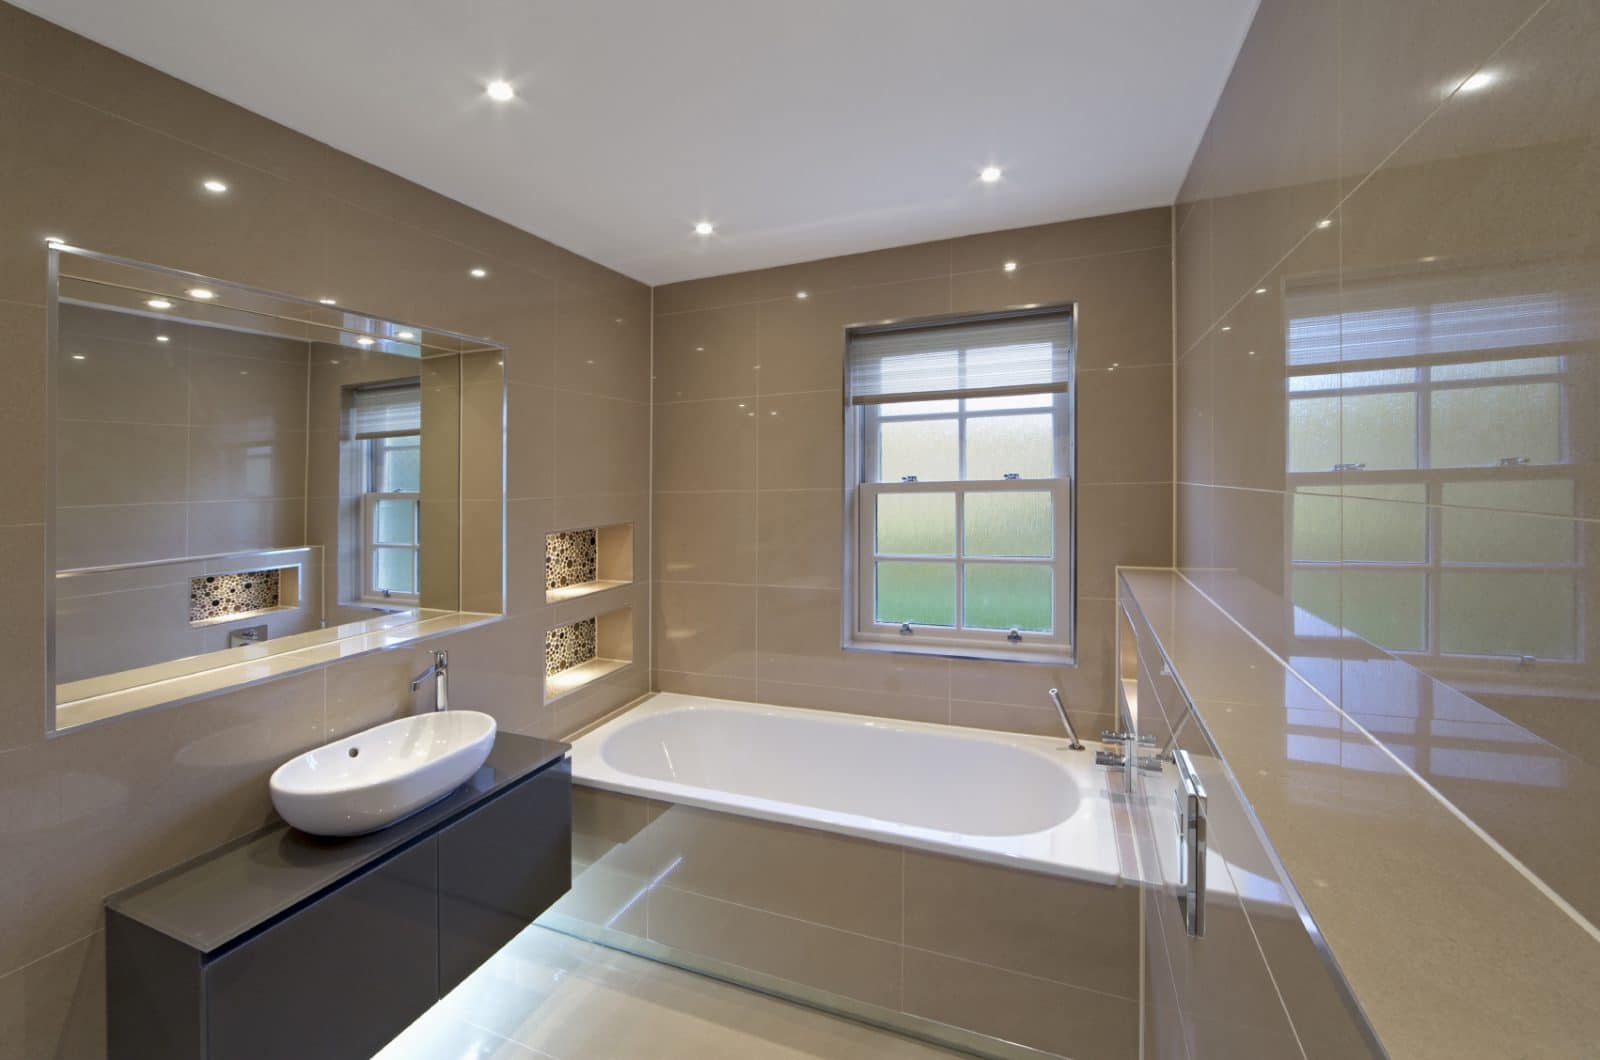 Bathroom Fitting Costs Homeforce, How Much Does It Cost To Install A Bathtub Uk